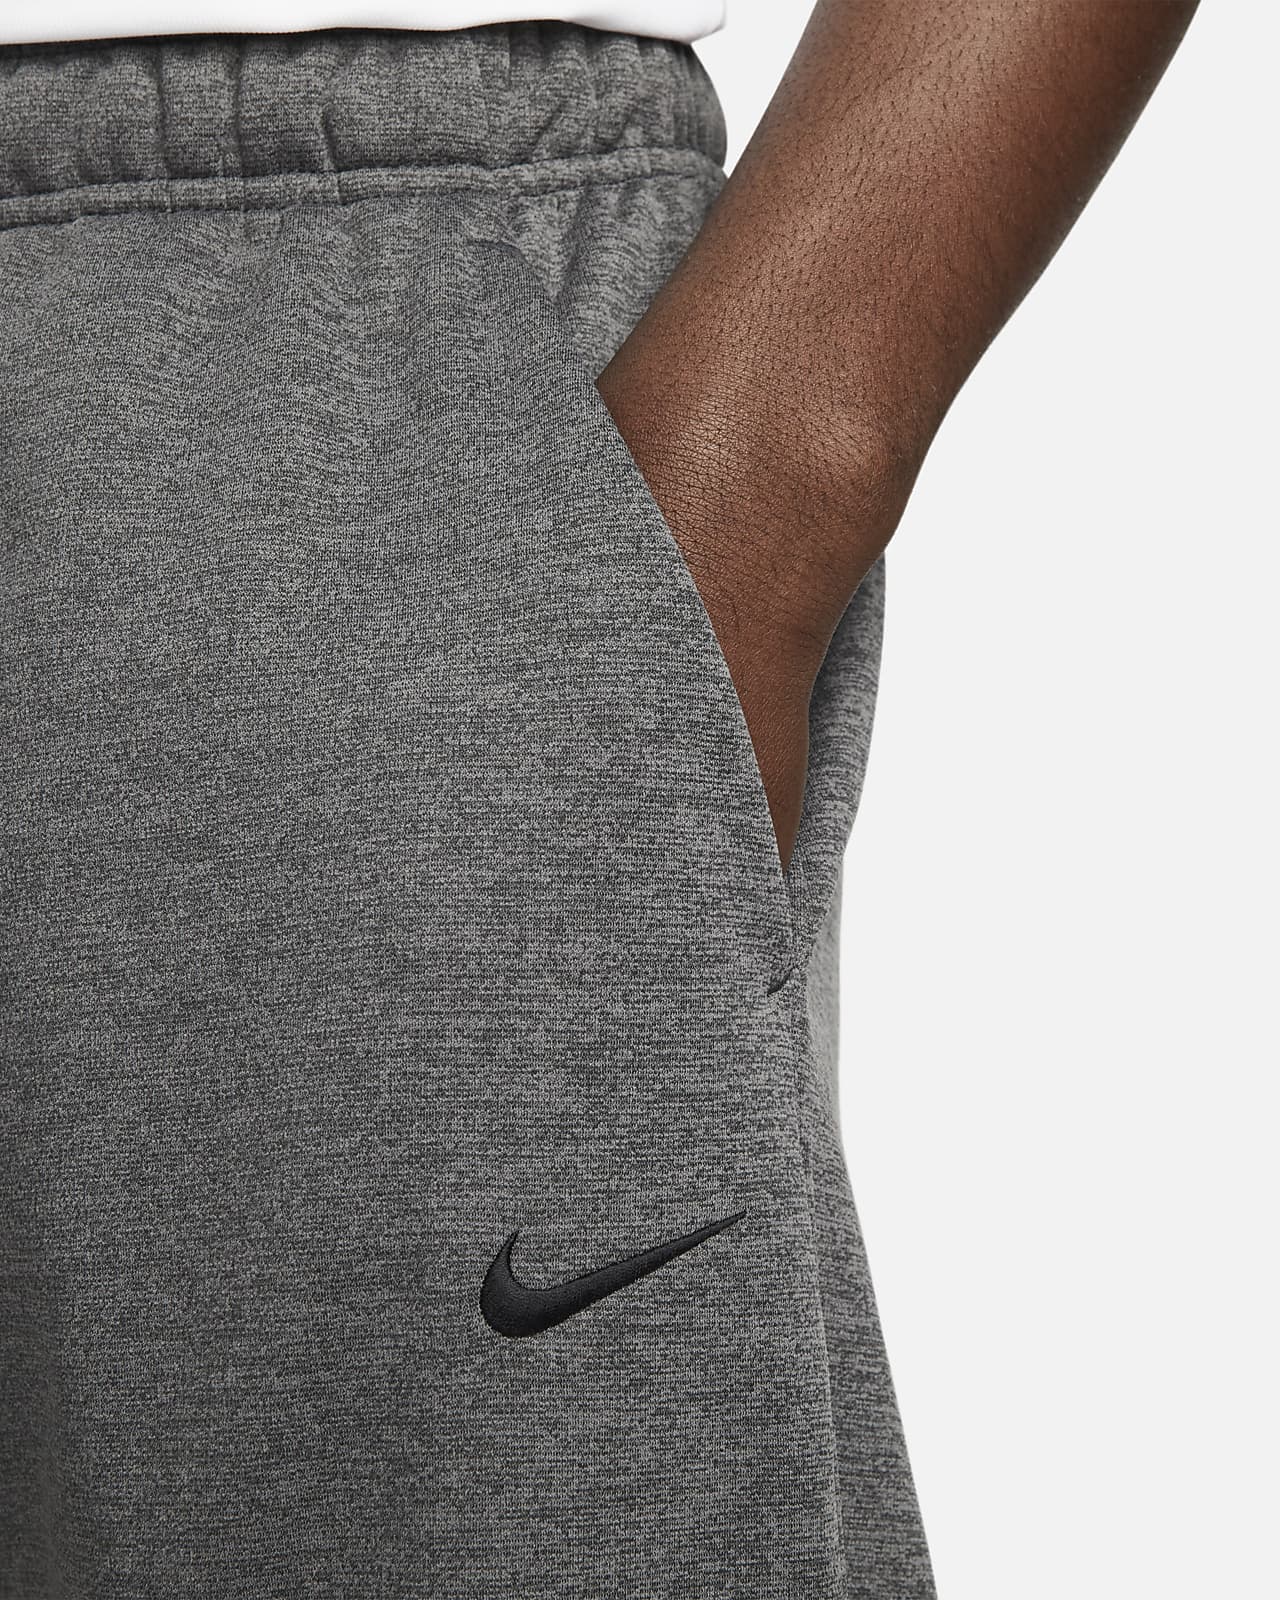 Nike Therma-Fit Novelty M vêtement running homme (Réf. DQ4854-326